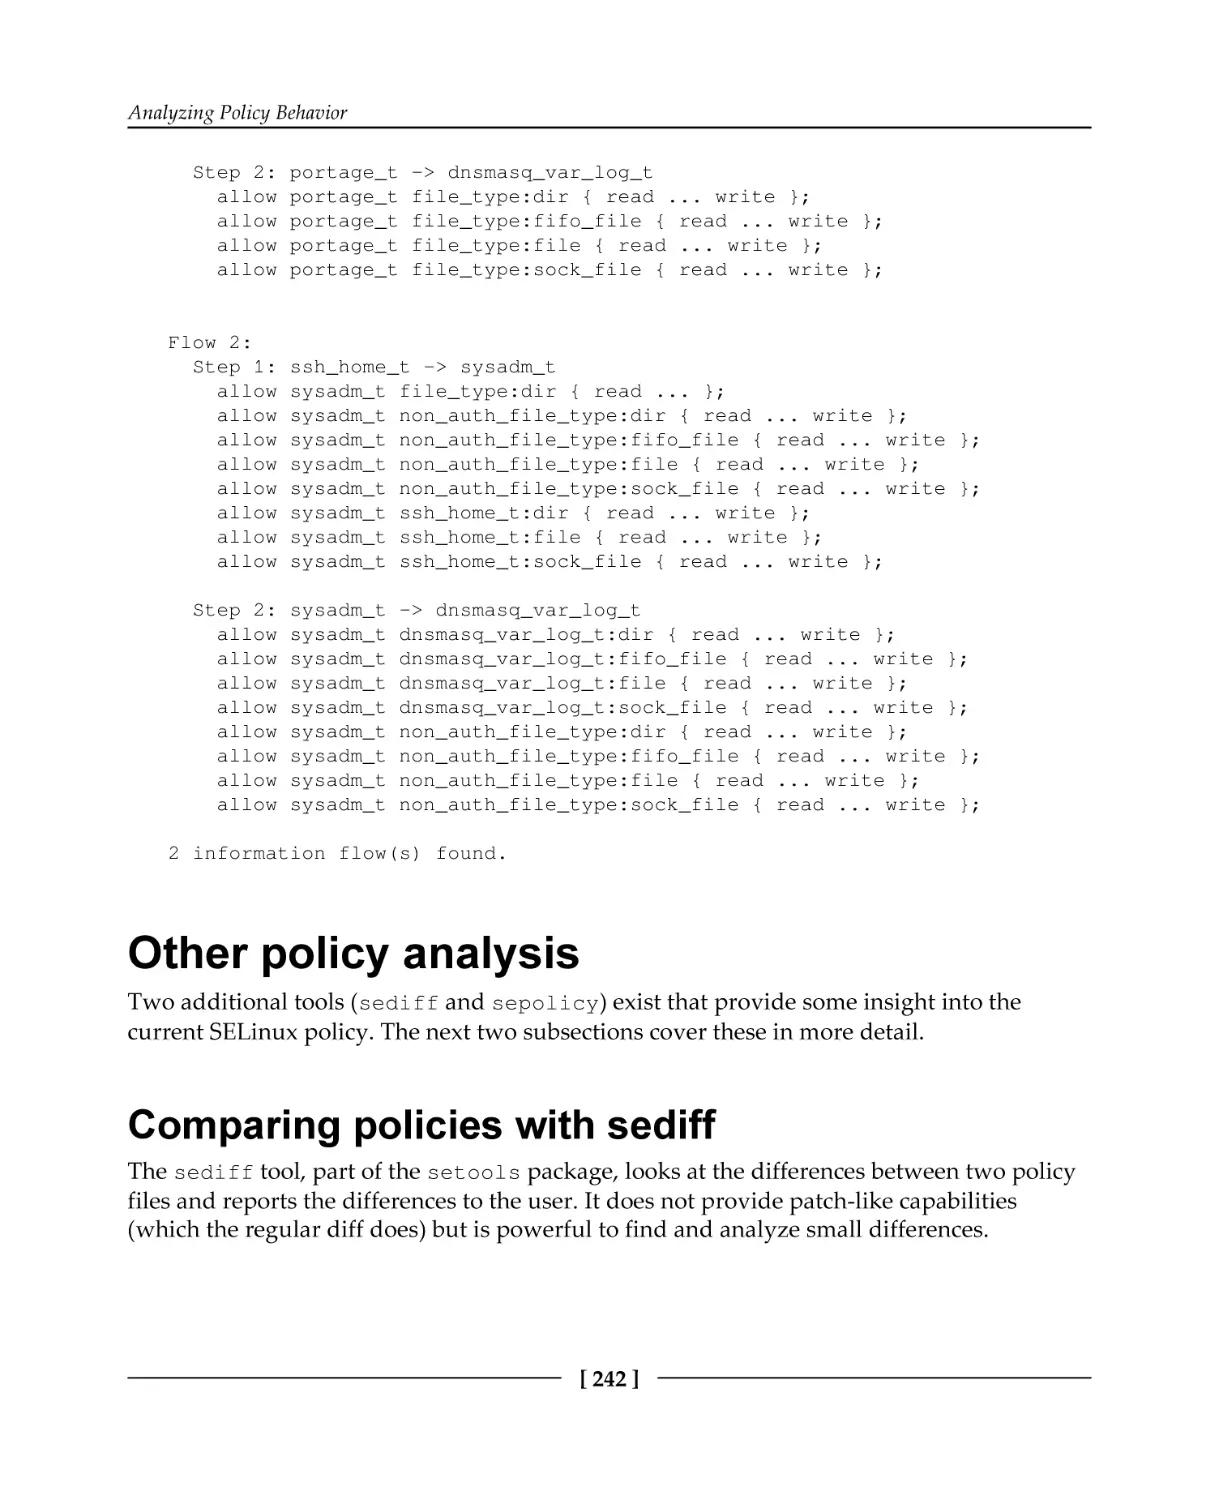 Other policy analysis
Comparing policies with sediff